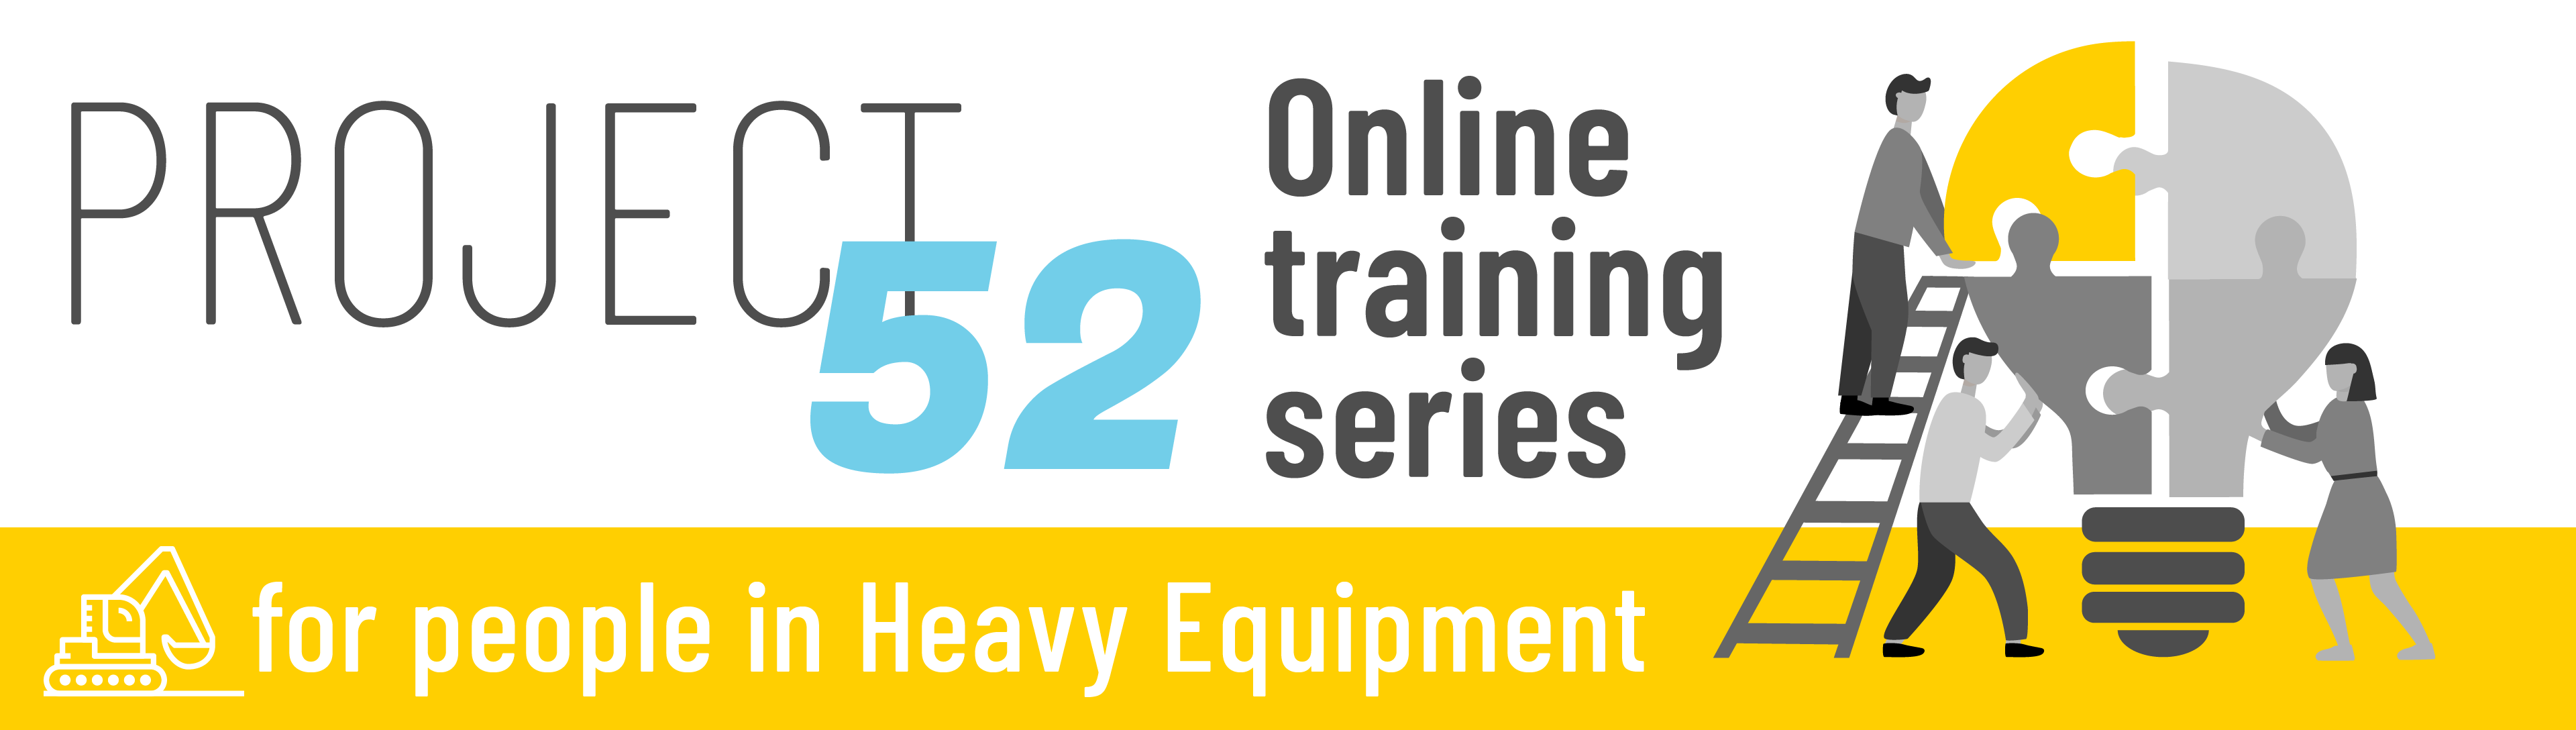 Professional, personal and leadership development for people in heavy equipment dealerships